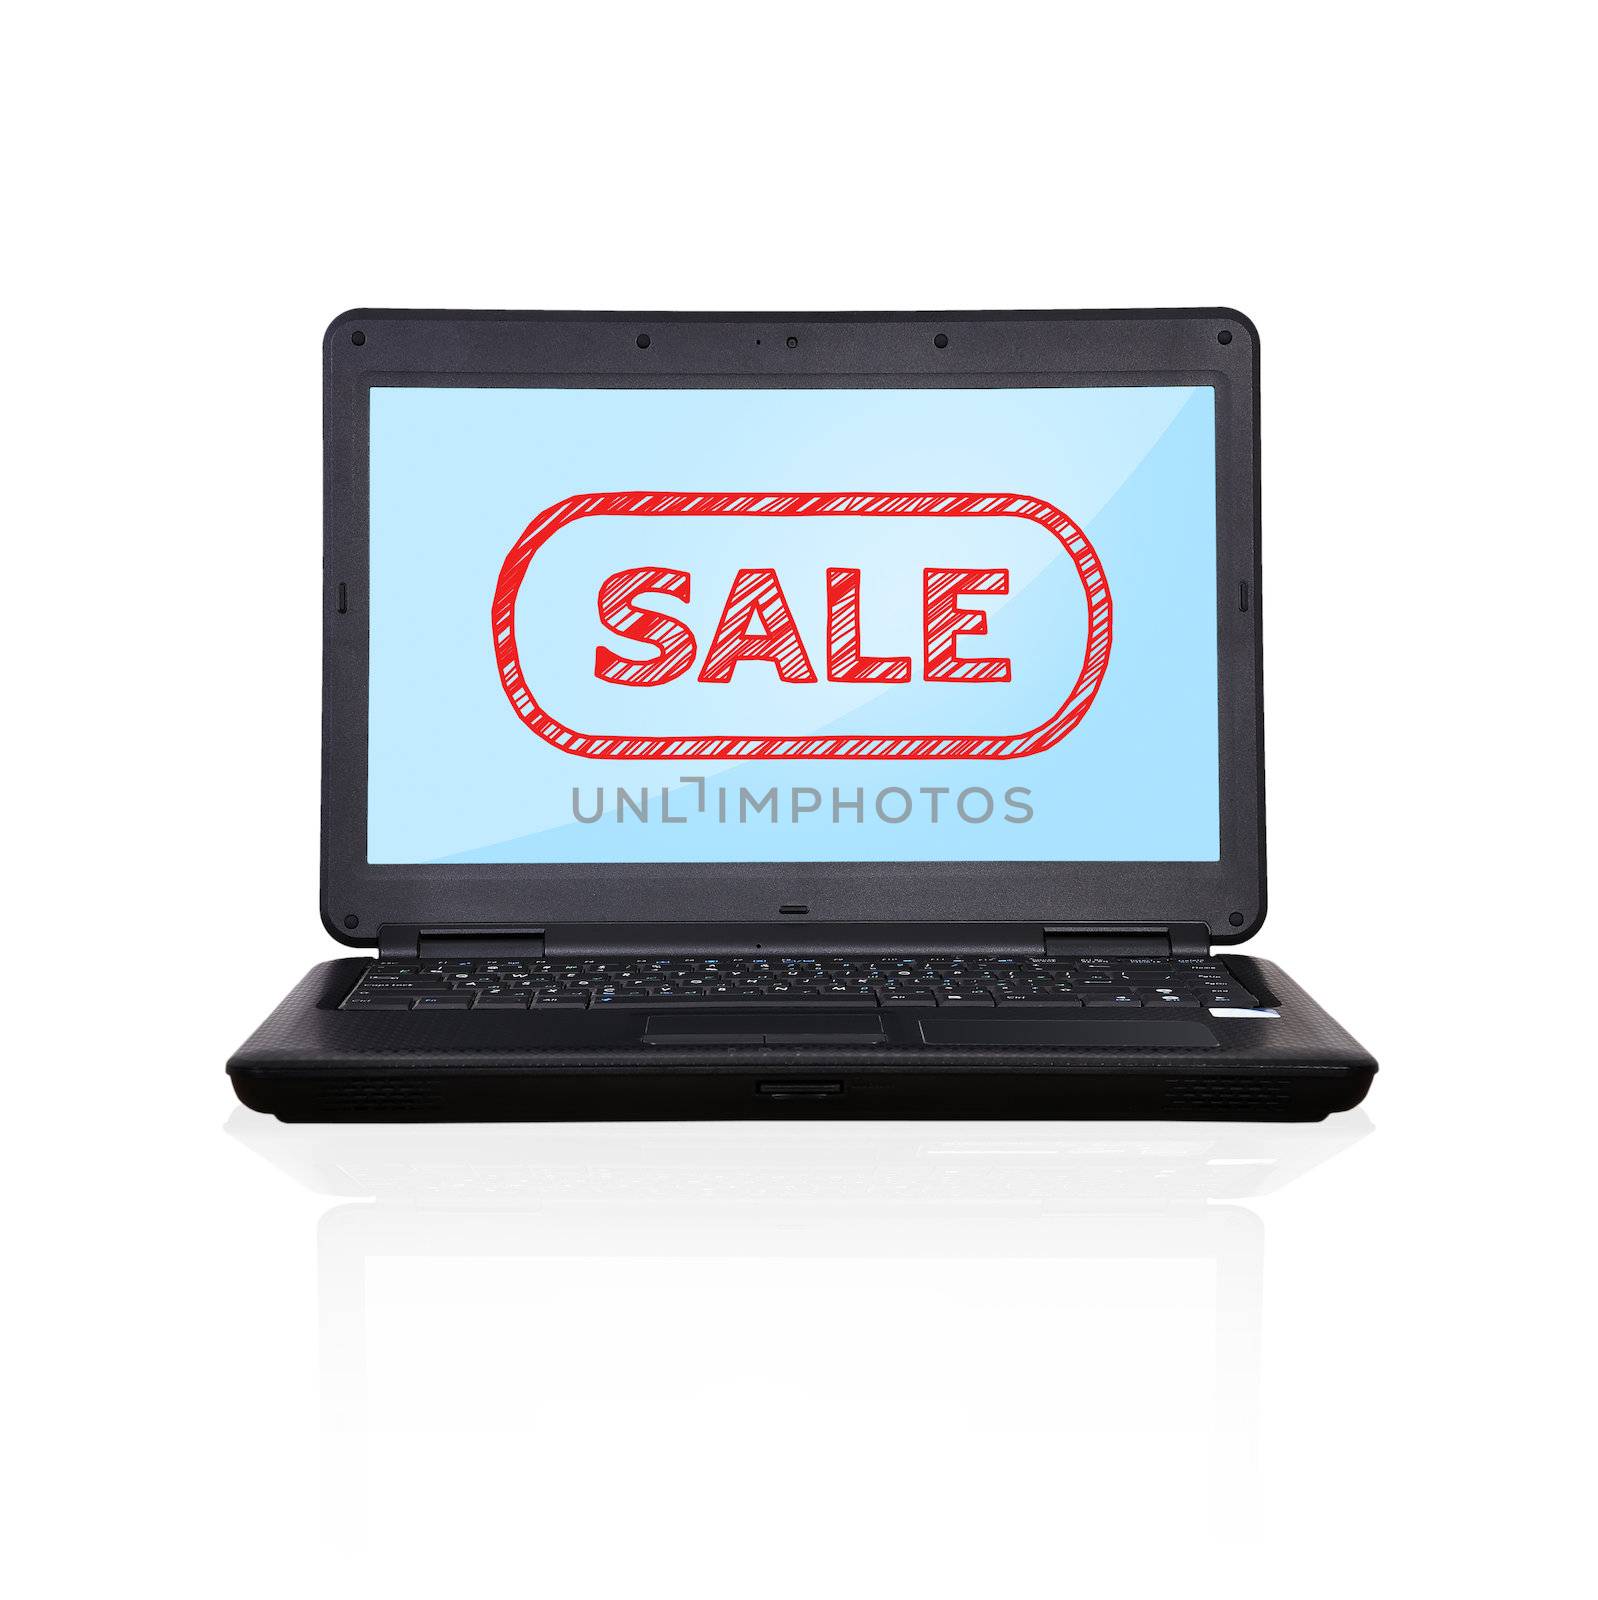 black laptop with sale symbol on screen